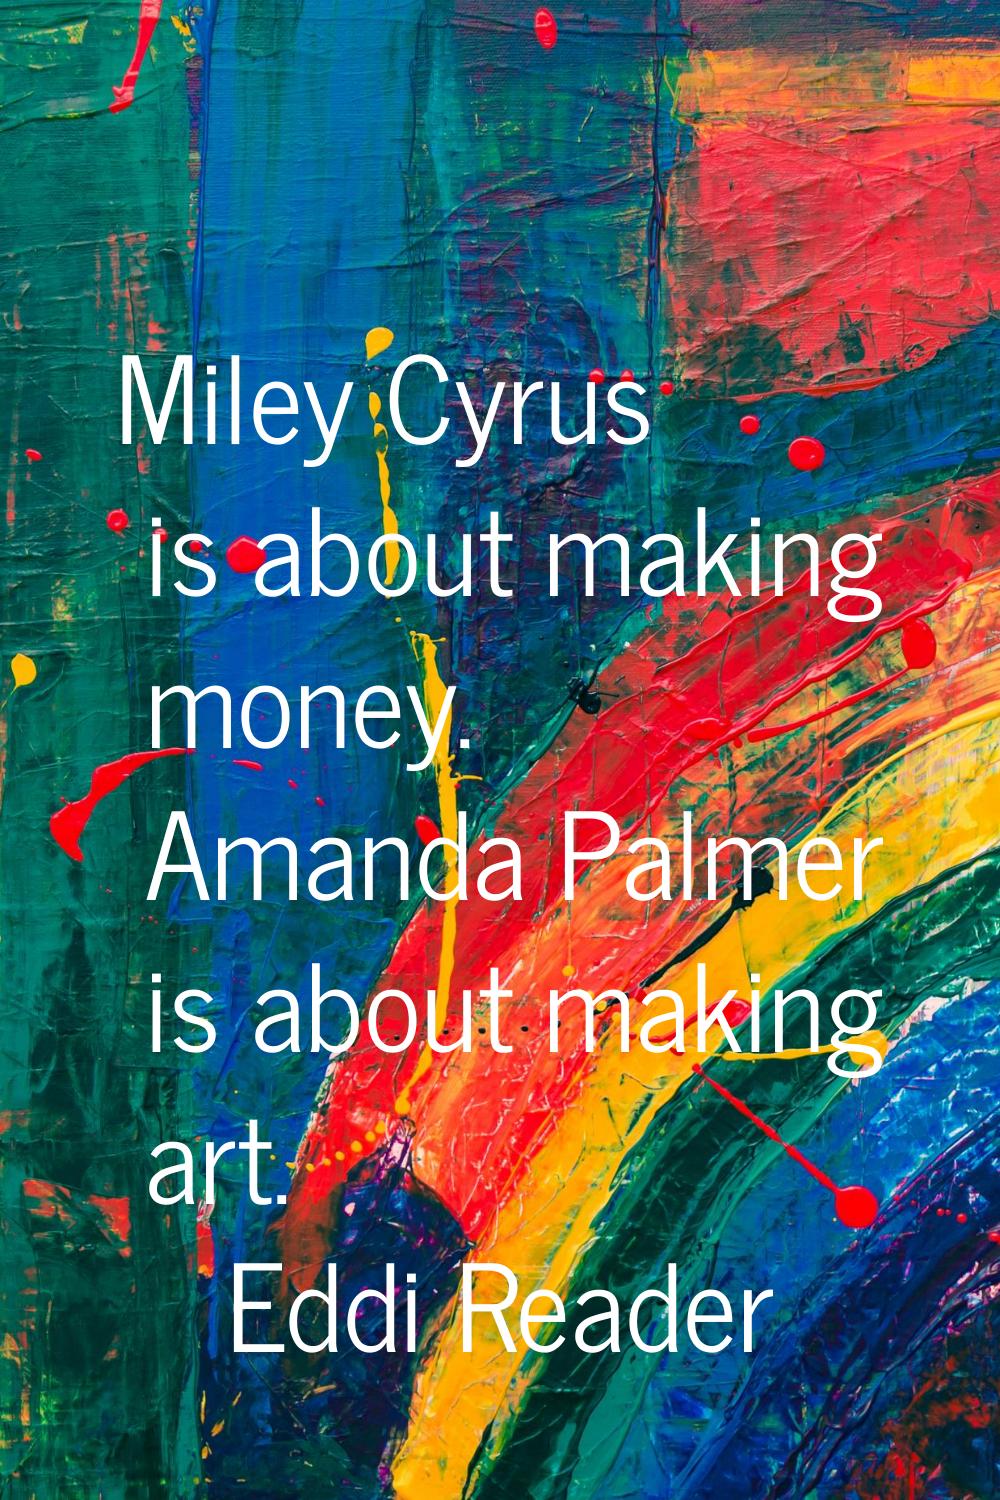 Miley Cyrus is about making money. Amanda Palmer is about making art.